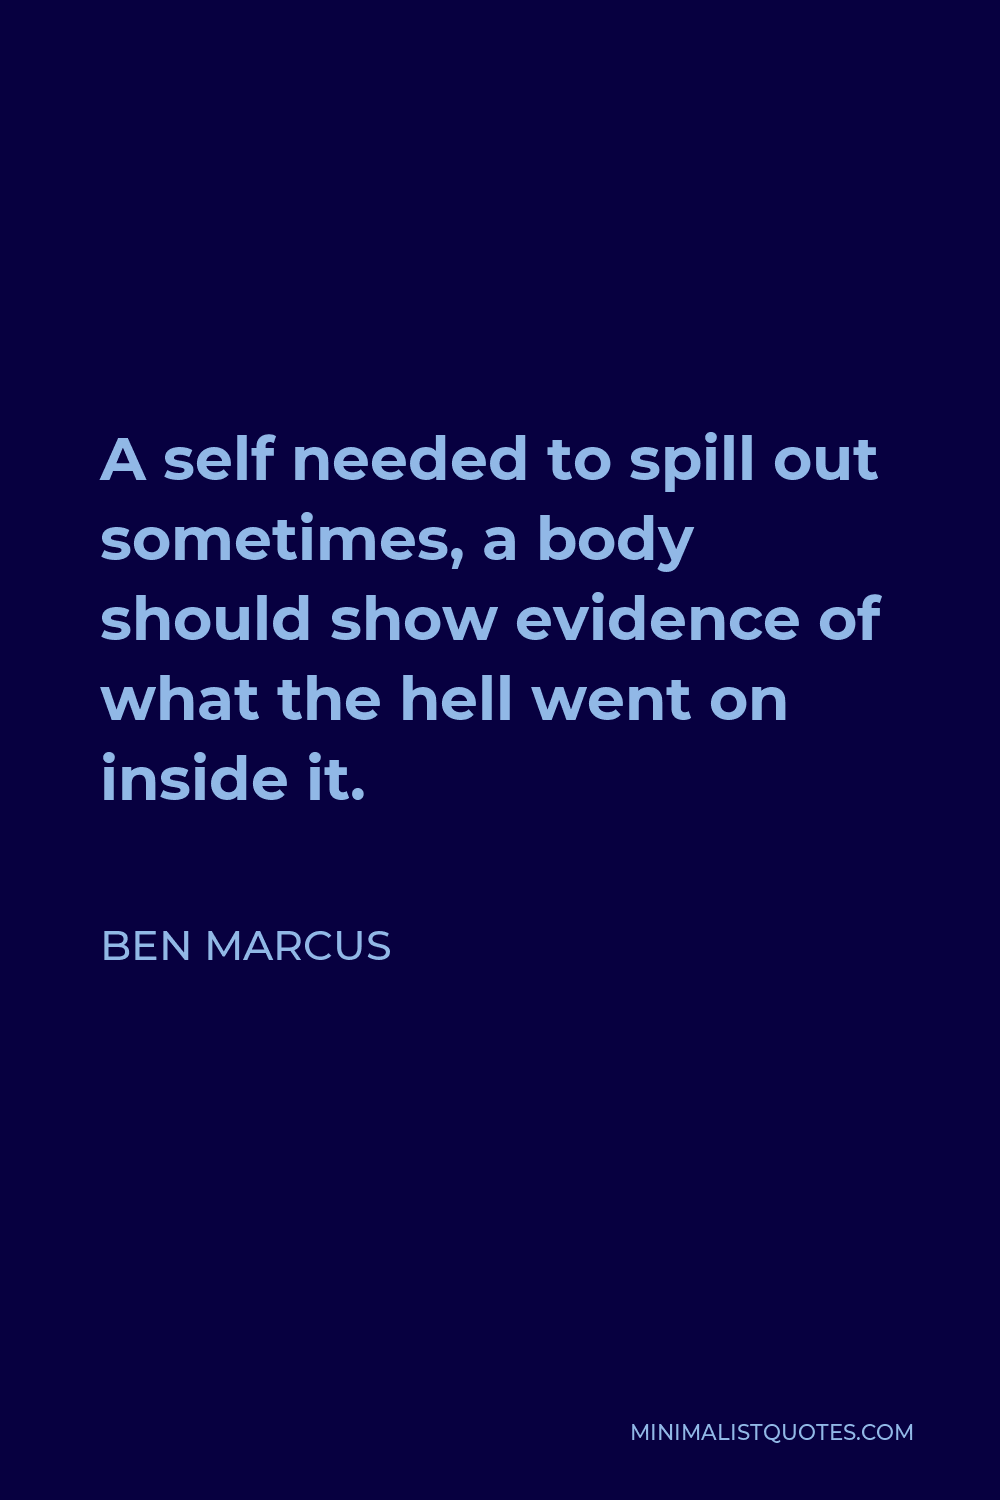 Ben Marcus Quote - A self needed to spill out sometimes, a body should show evidence of what the hell went on inside it.